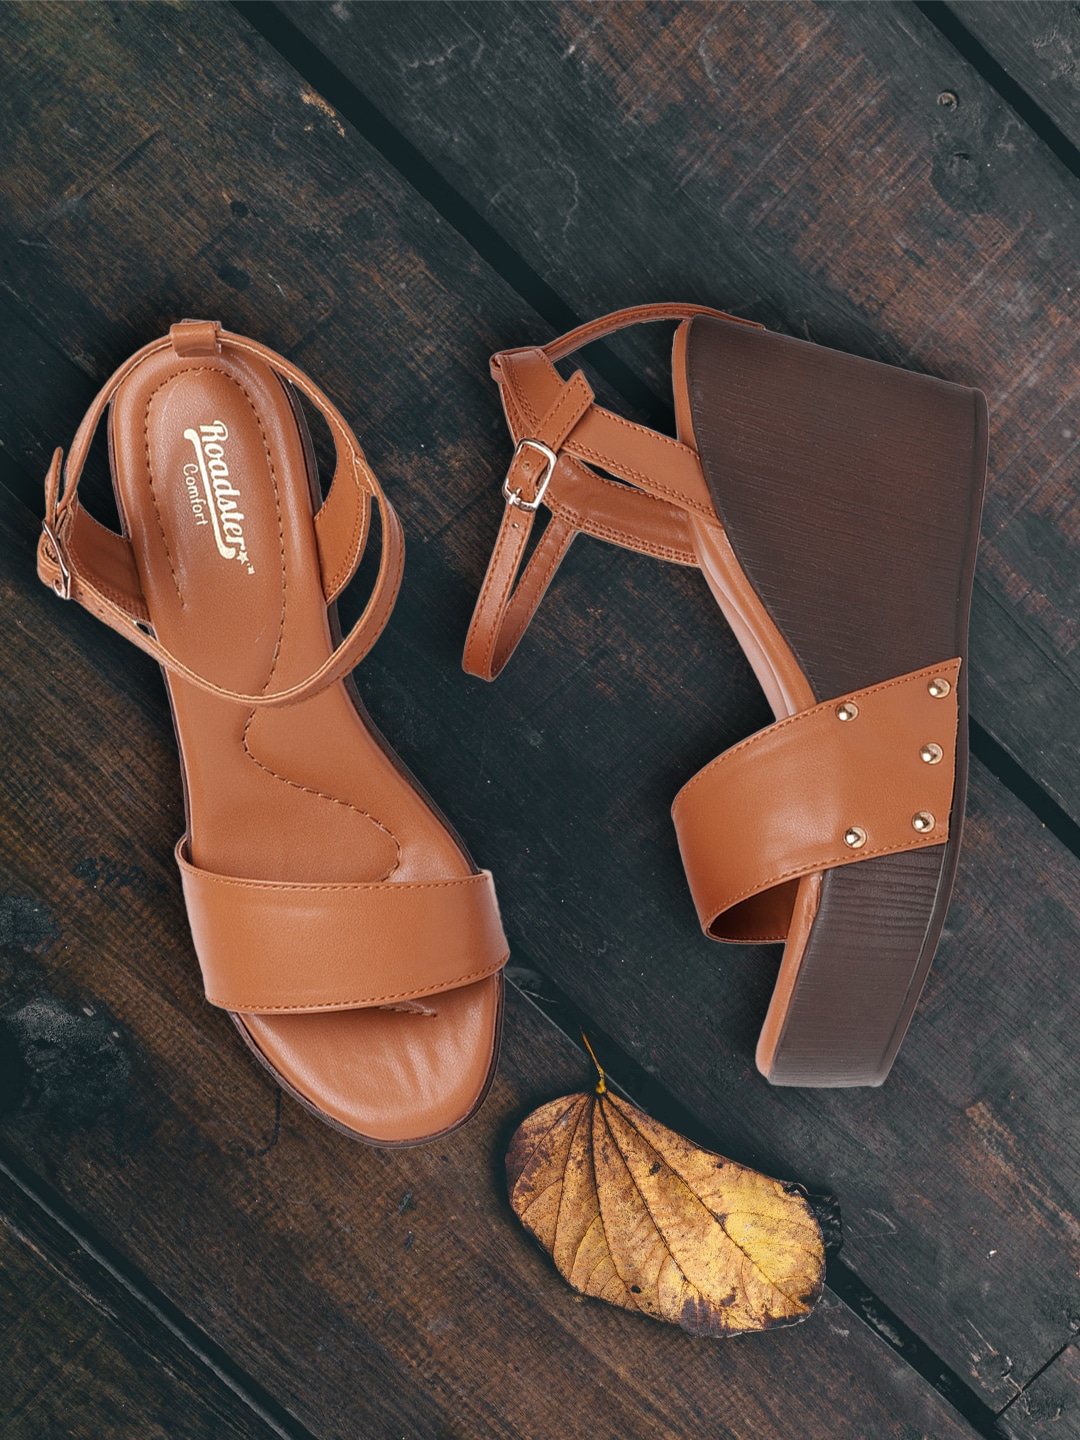 The Roadster Lifestyle Co Tan Brown Solid Wedges Price in India